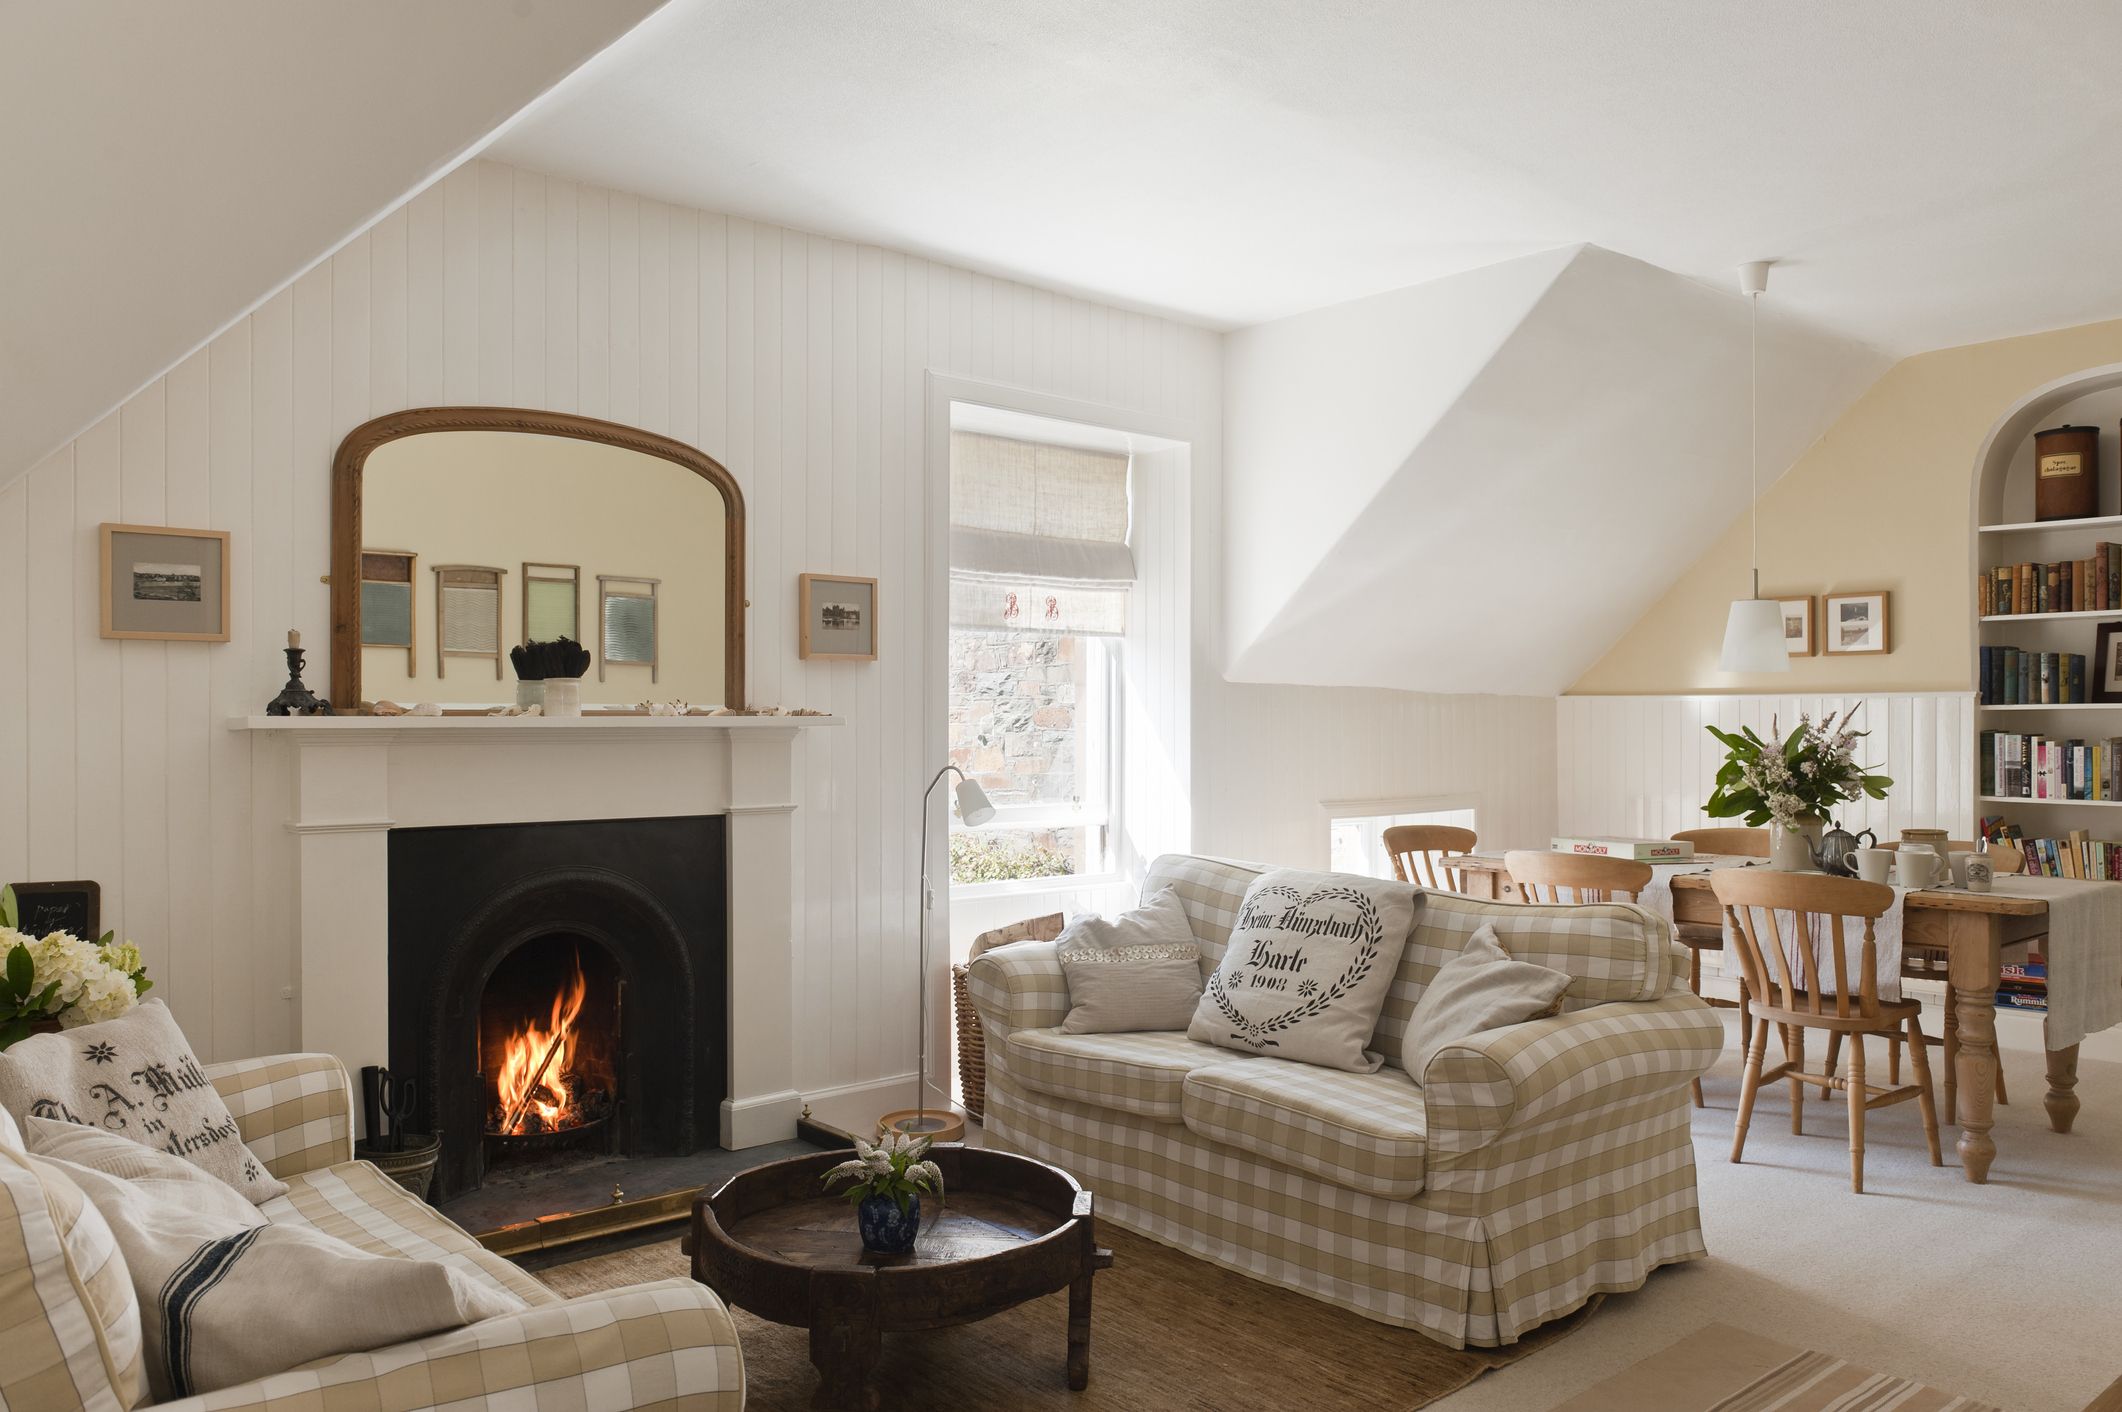 10 Expert Design Ideas to Make Your Home Warm and Cozy